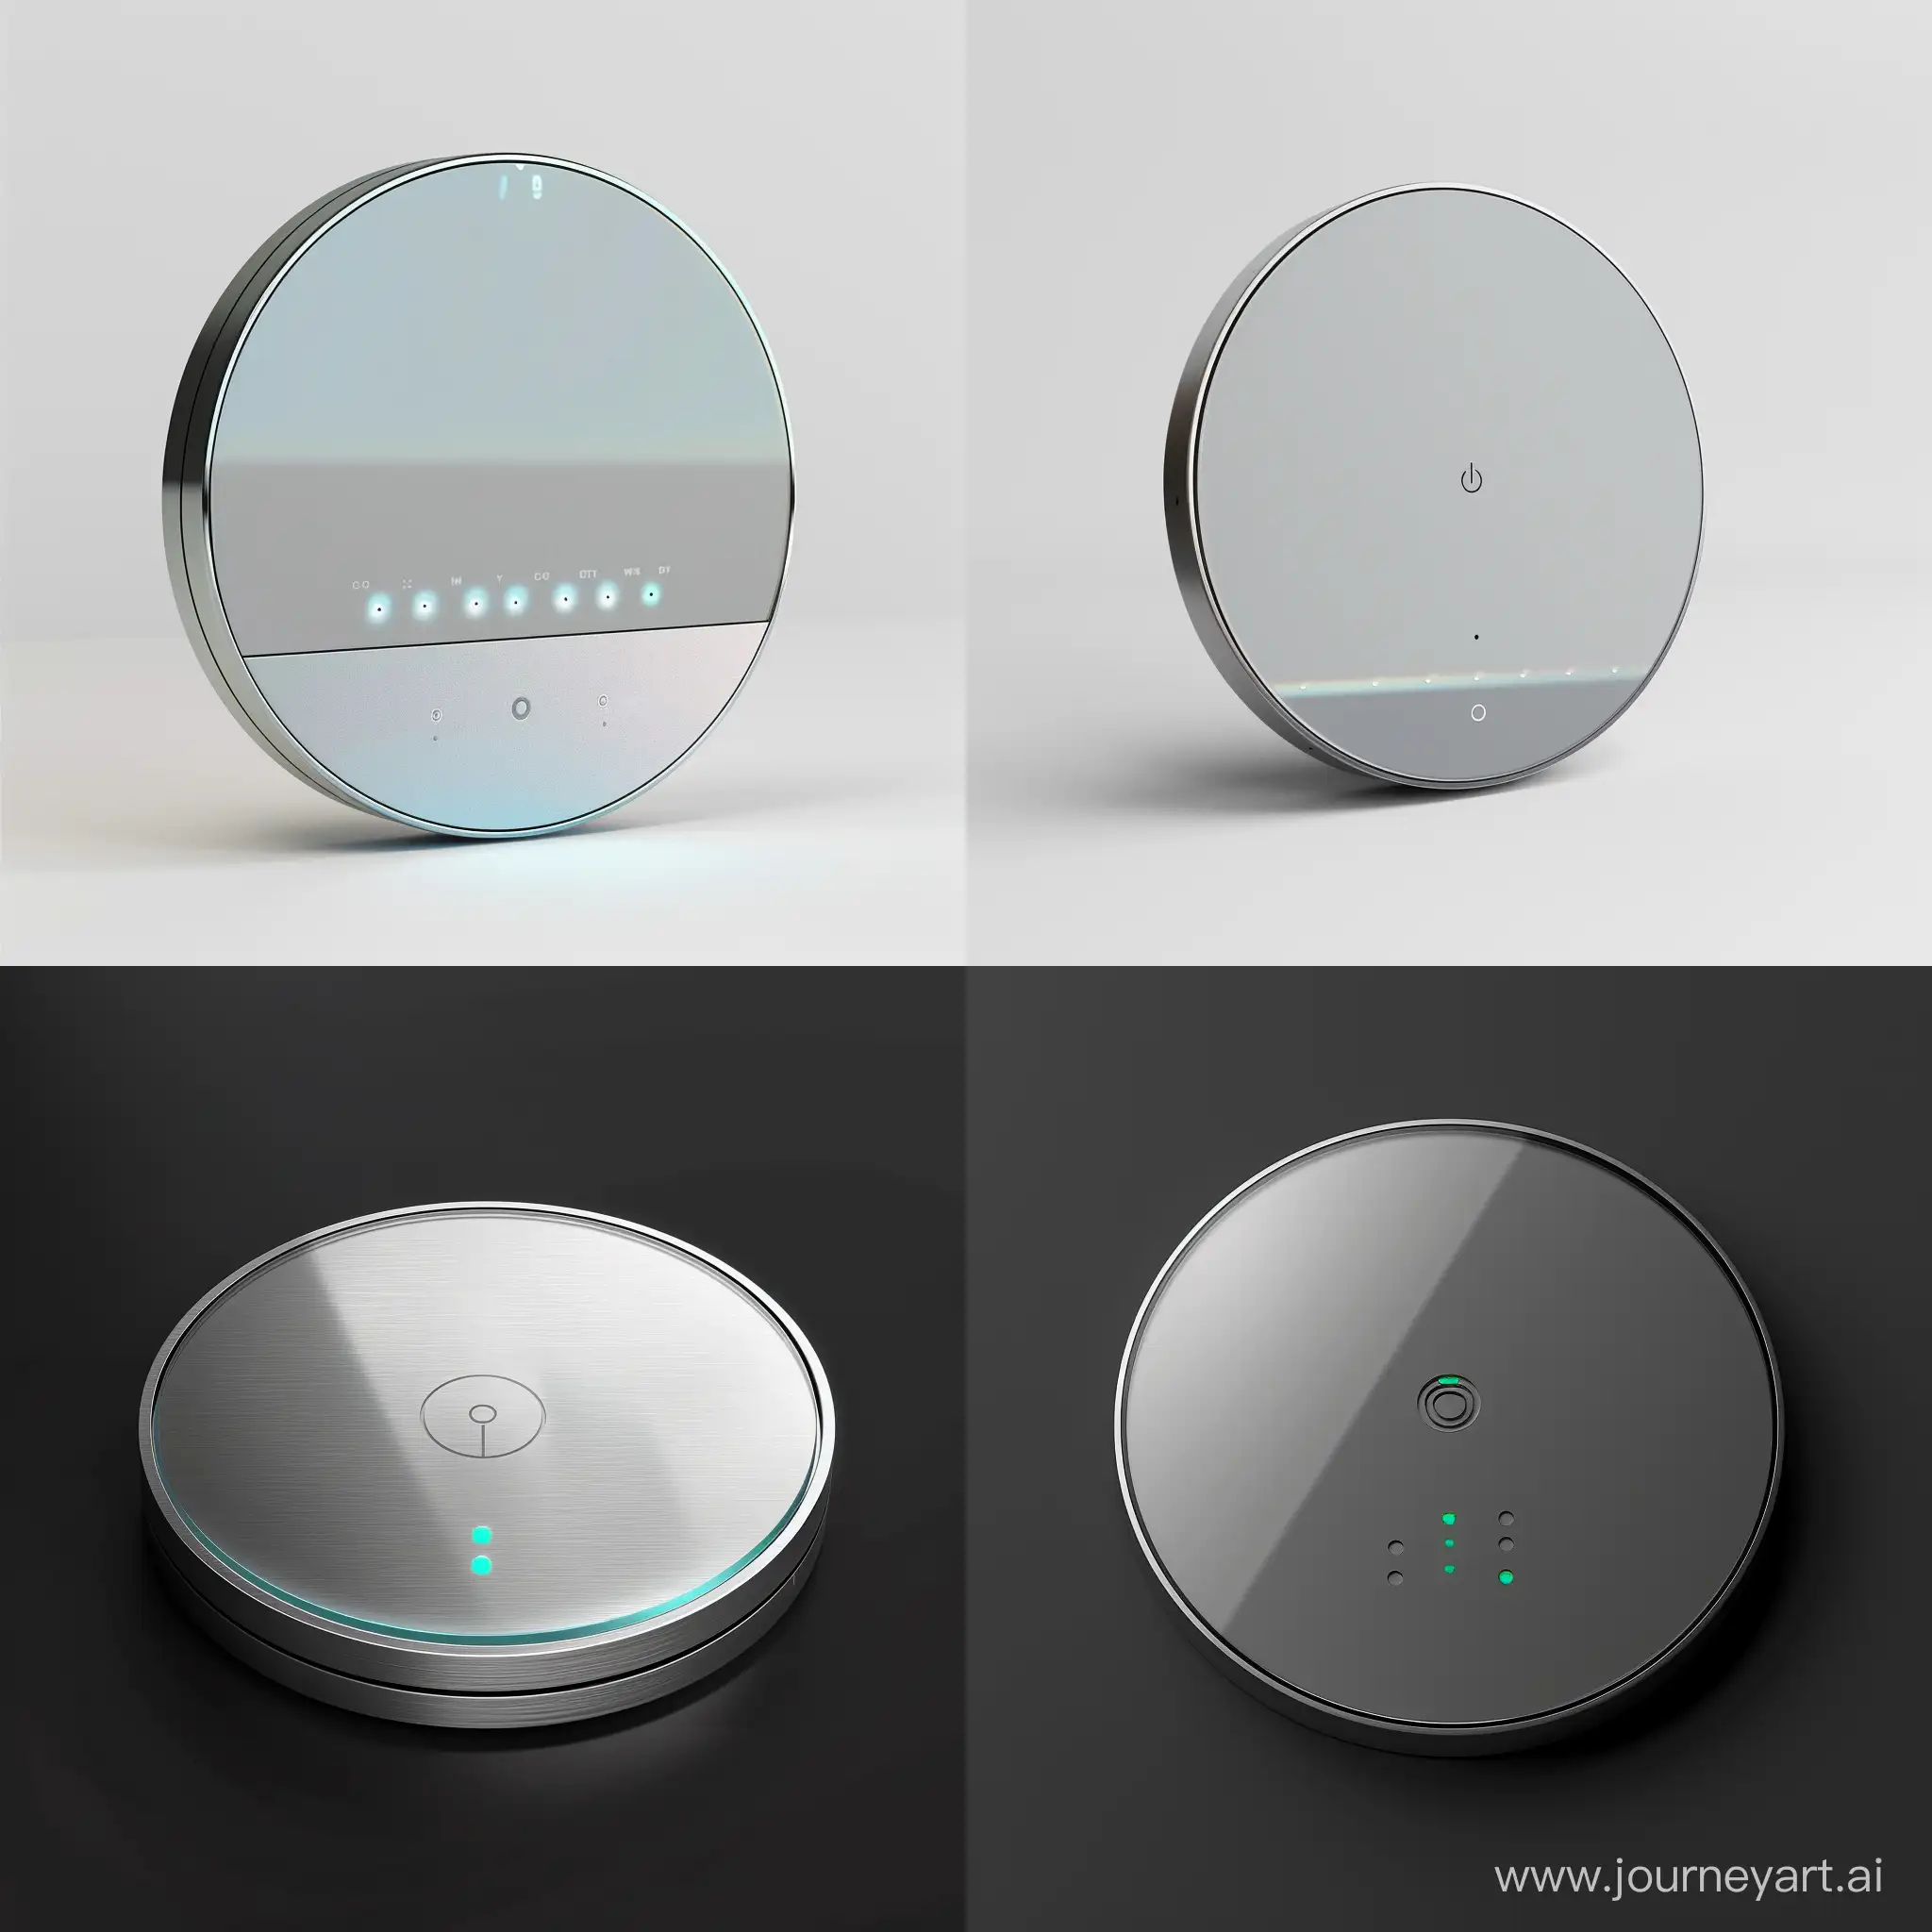 "Envision a minimalist, disc-shaped smart energy monitor crafted from recycled aluminum with a sleek, glass touch-sensitive surface. This device, approximately 10 cm in diameter and 1.5 cm thick, combines elegance with functionality, embodying Scandinavian design principles. Its matte silver or space gray body is accented with a subtly engraved logo, and LED indicators beneath the glass surface illuminate to display energy consumption data. The design is unobtrusive, meant to seamlessly integrate into any modern smart home environment, promoting active engagement with energy usage through simplicity and intuitive interaction."realistic style